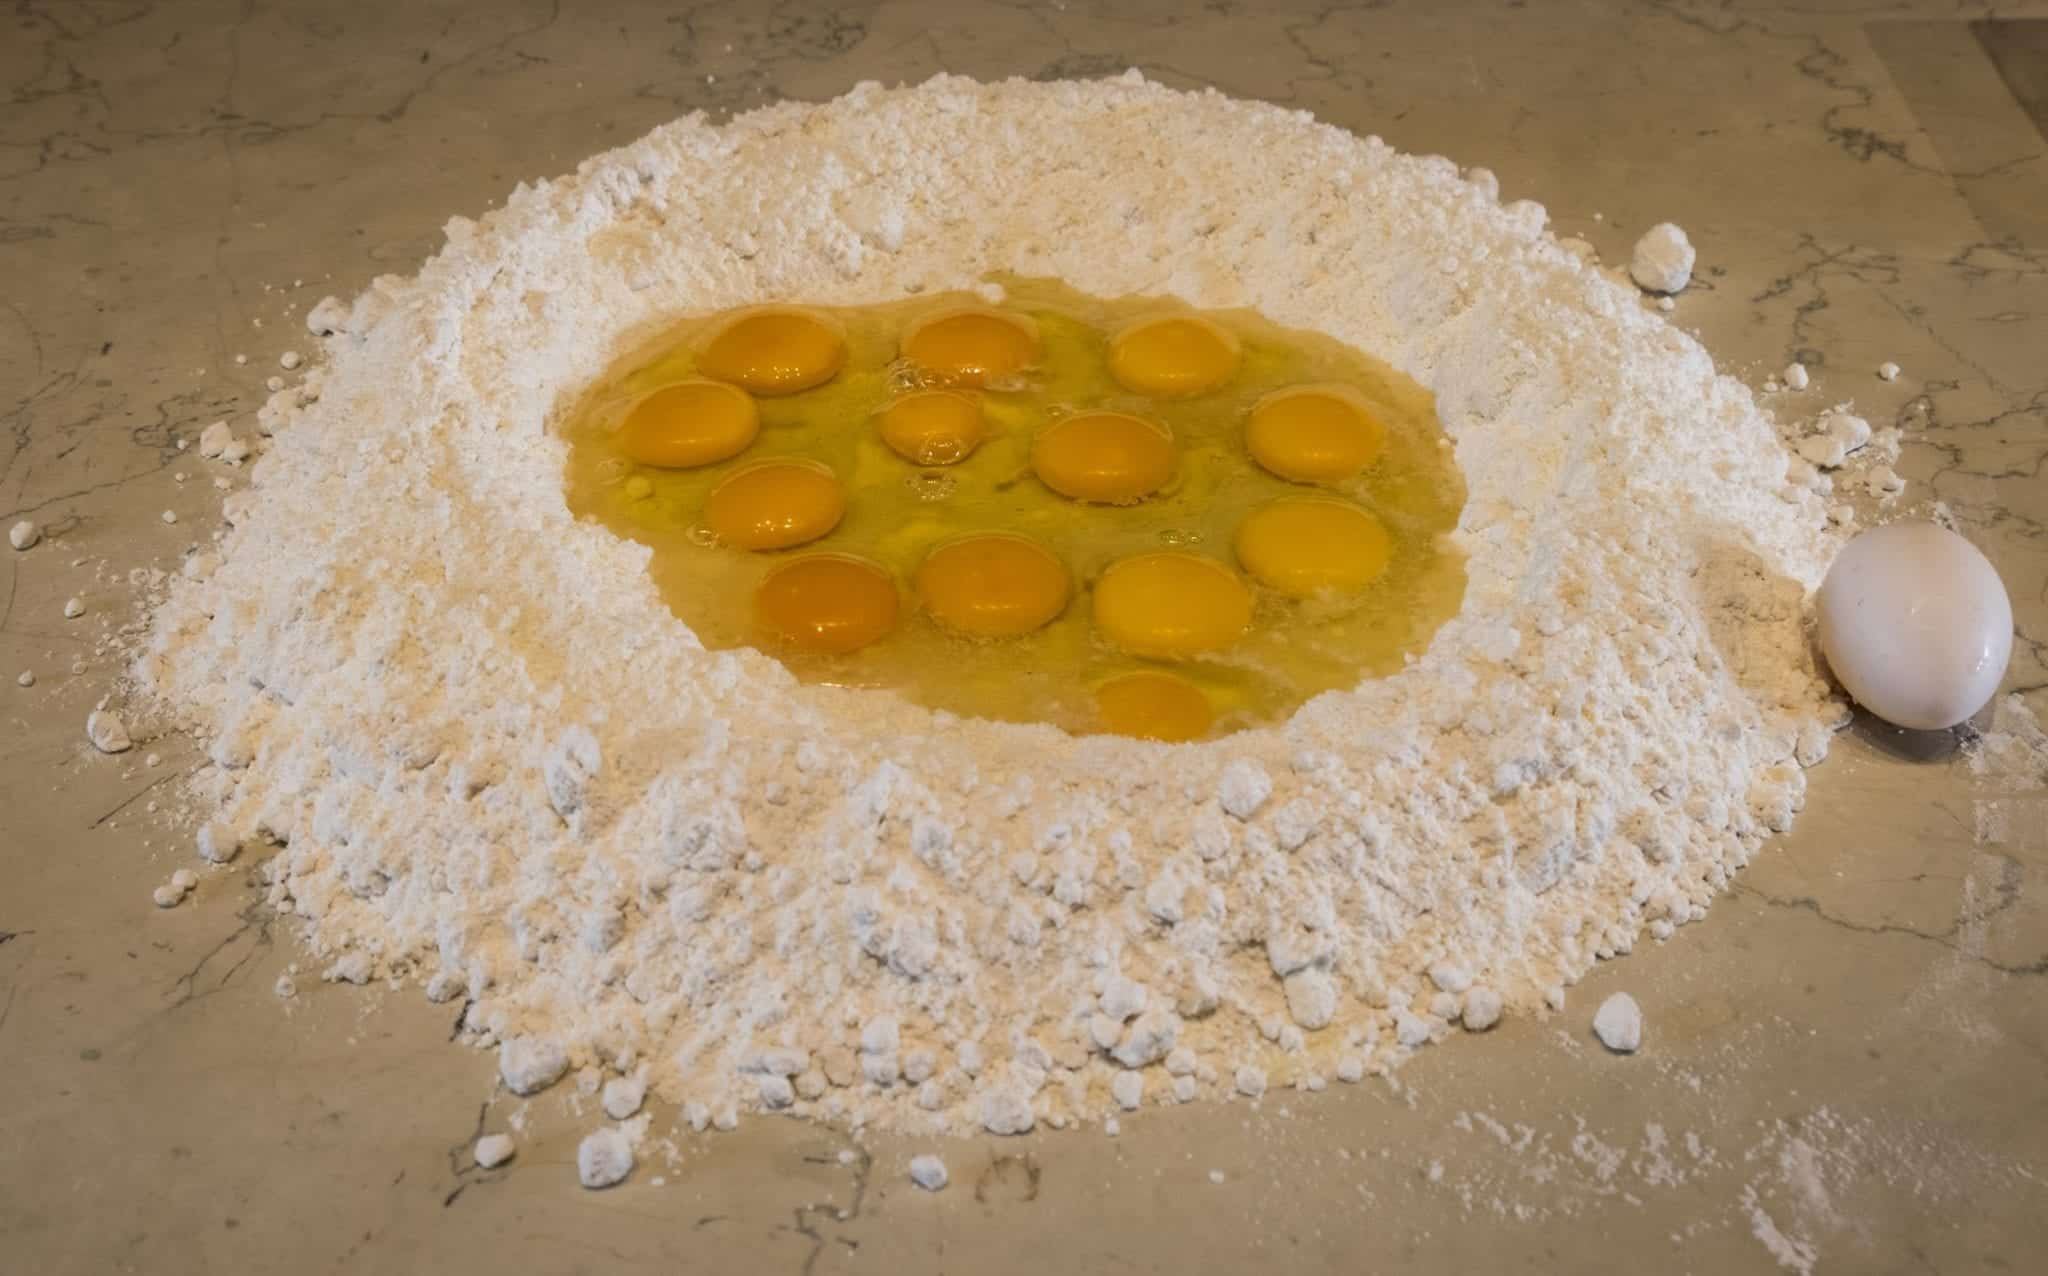 A giant mound of flour with twelve raw eggs sitting inside it.